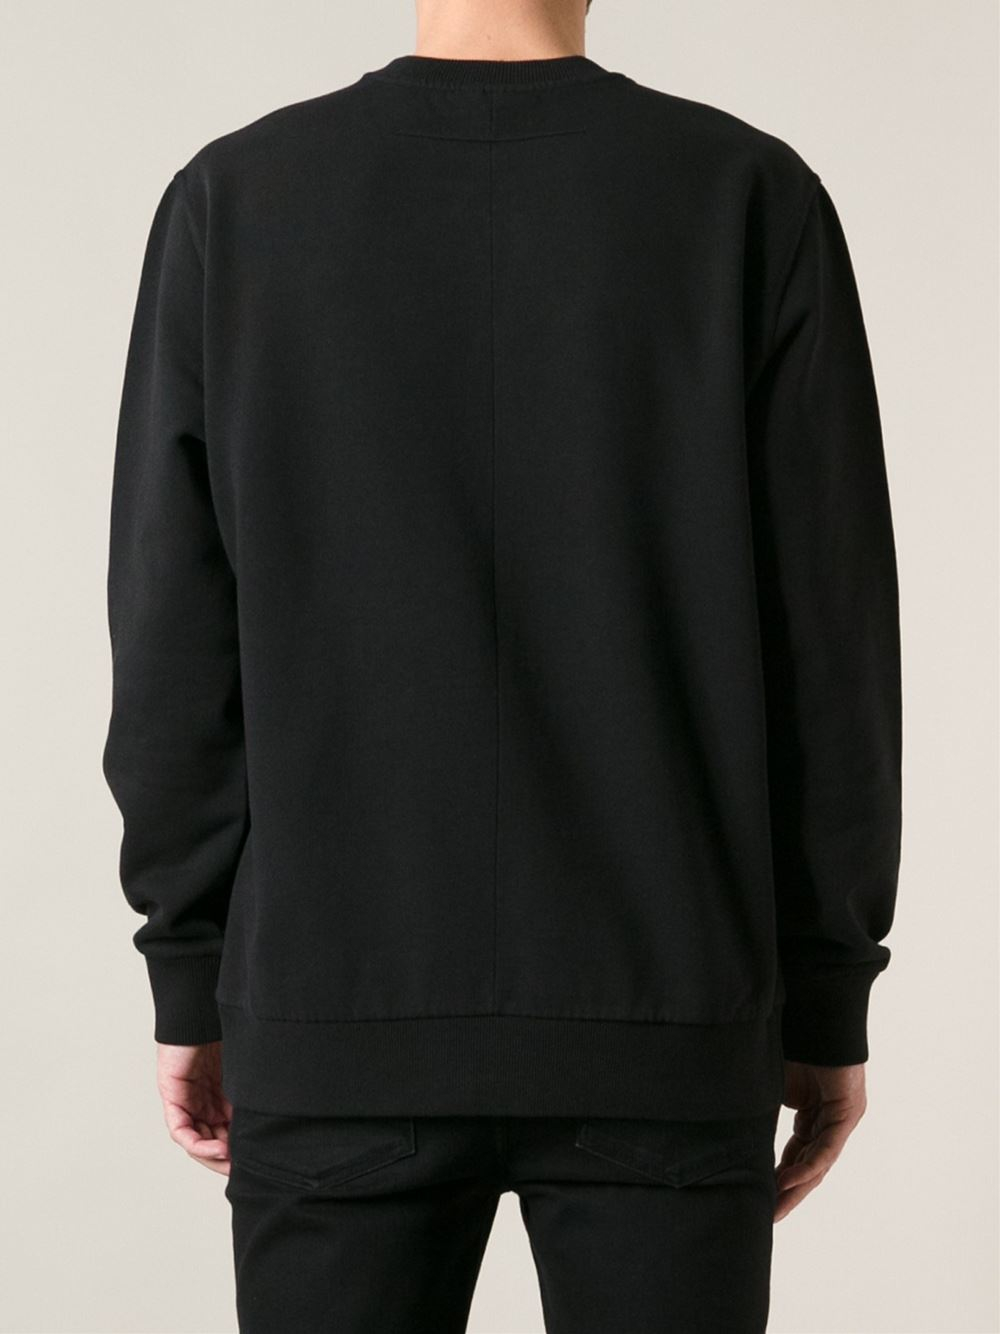 Lyst - Givenchy '17' Sweatshirt in Black for Men